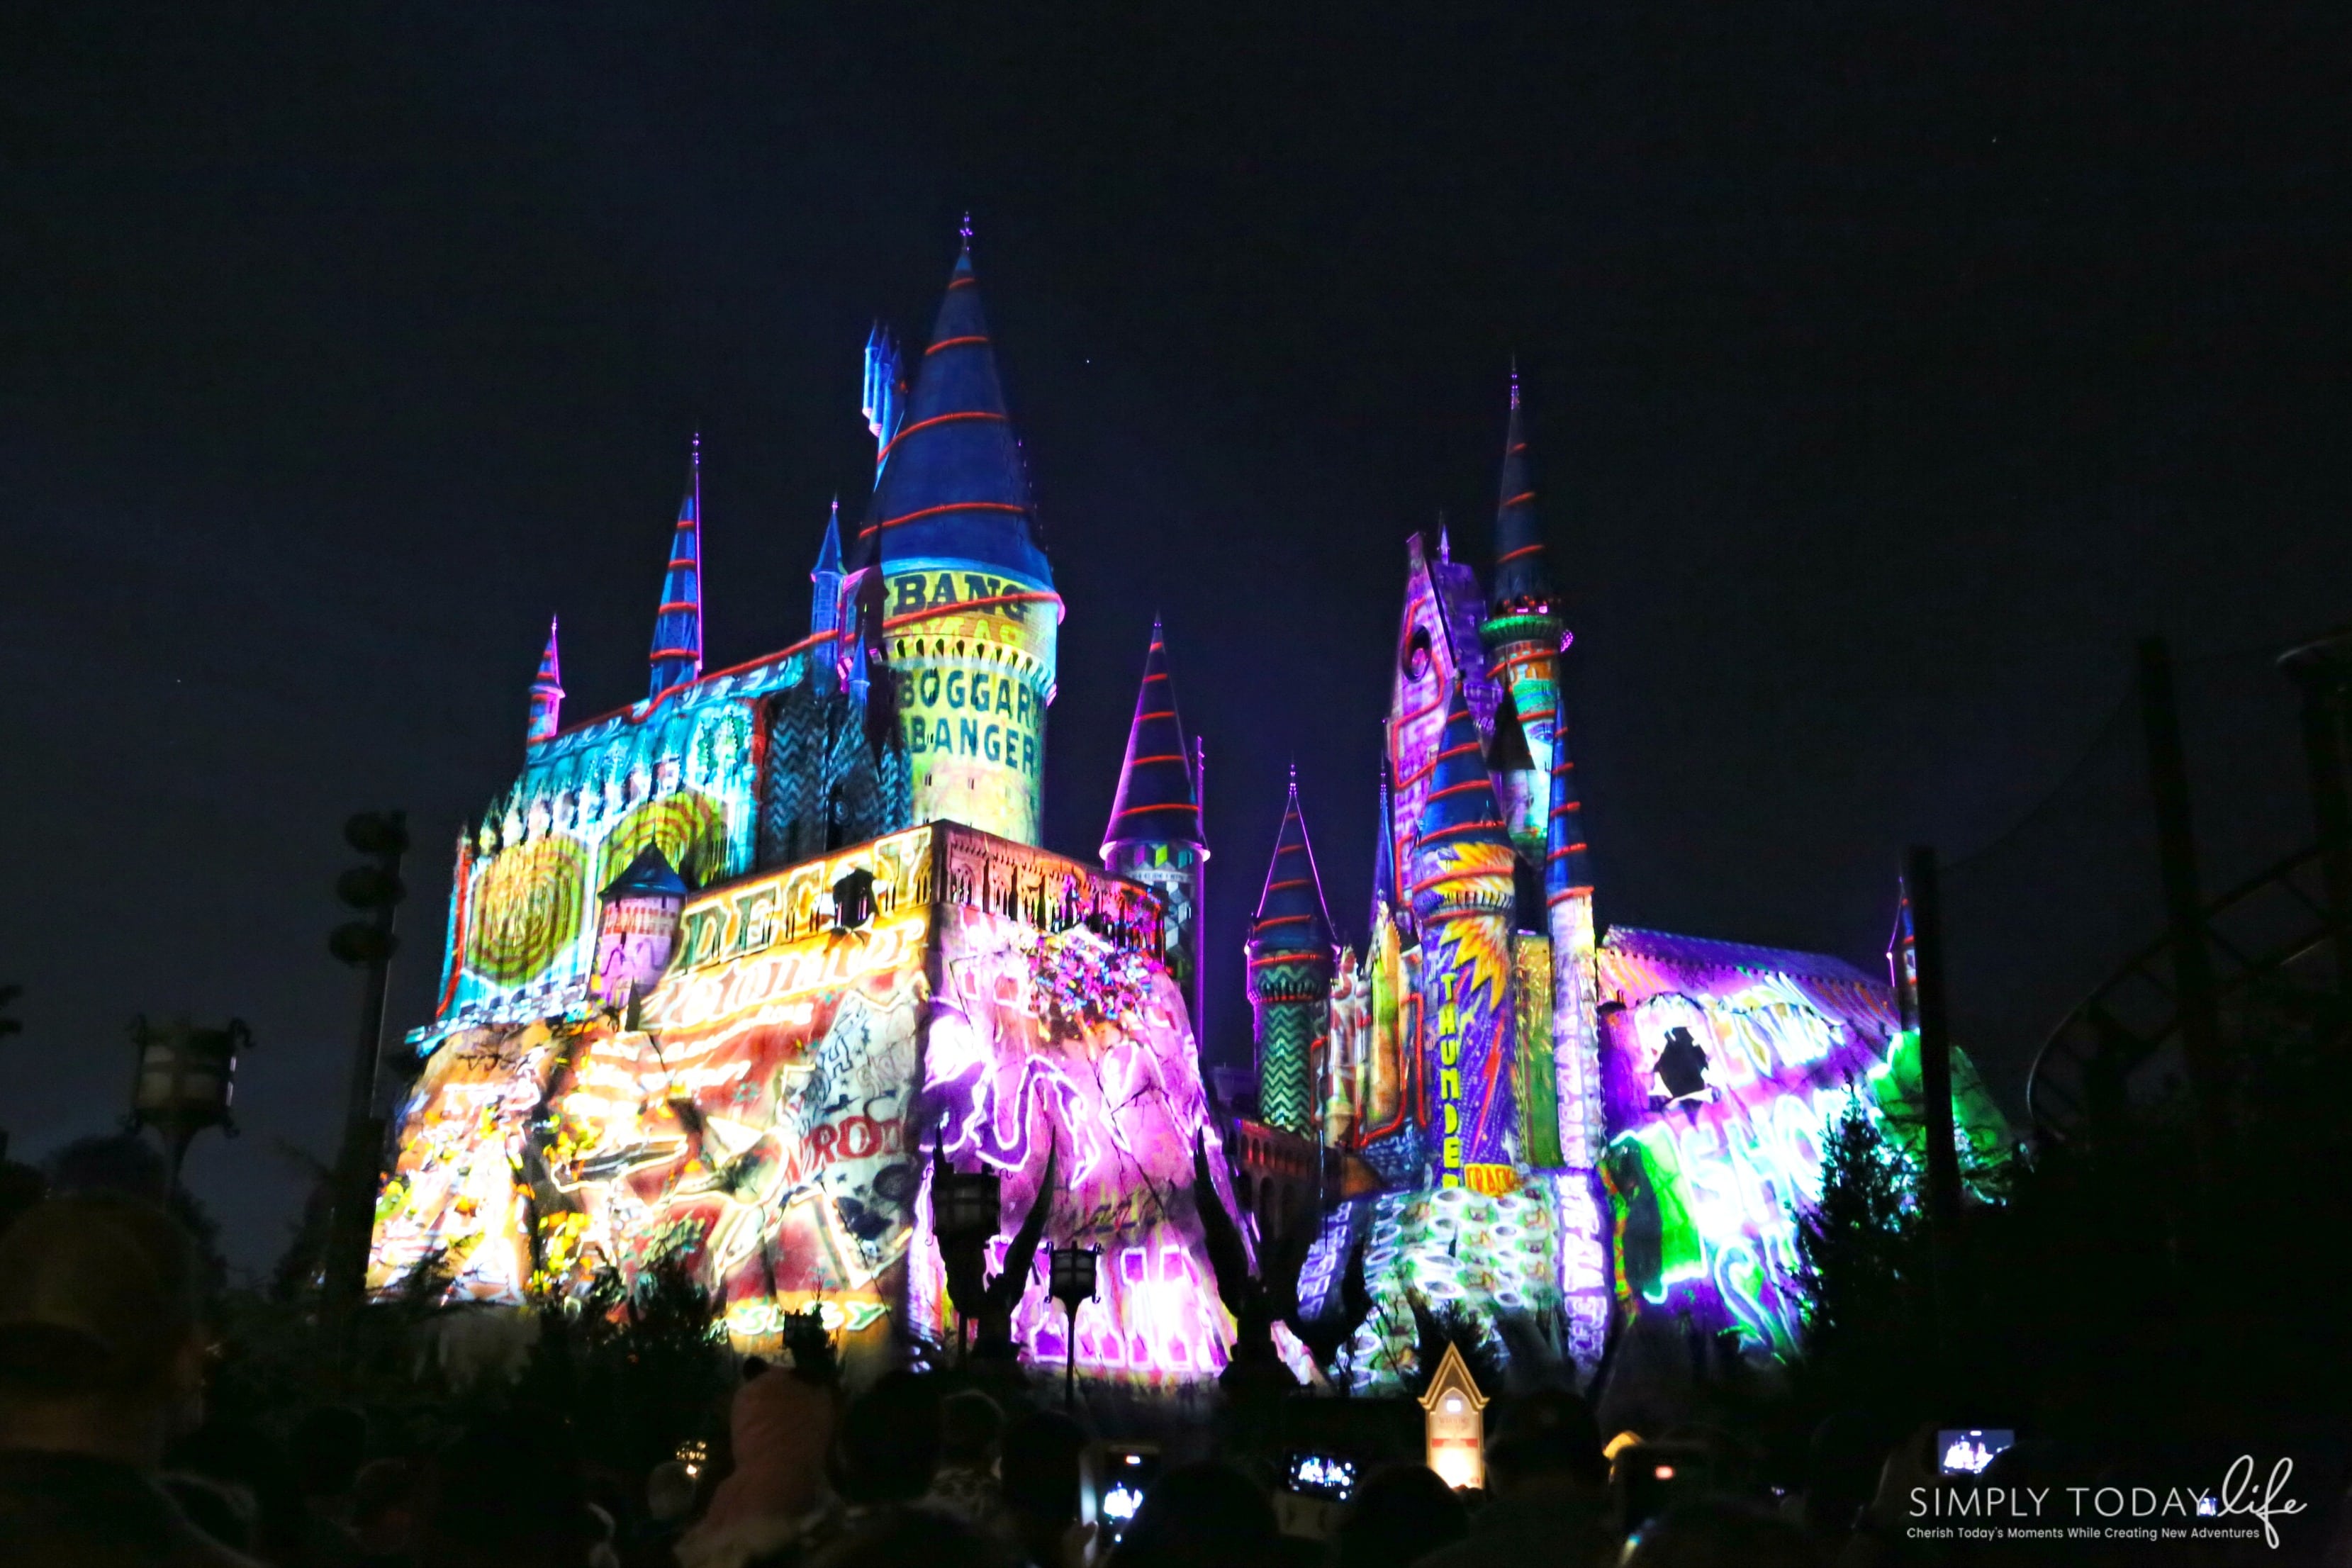 Family Guide To Celebrating the Holidays at Universal Orlando Resort - The Magic of Christmas at Hogwarts Castle